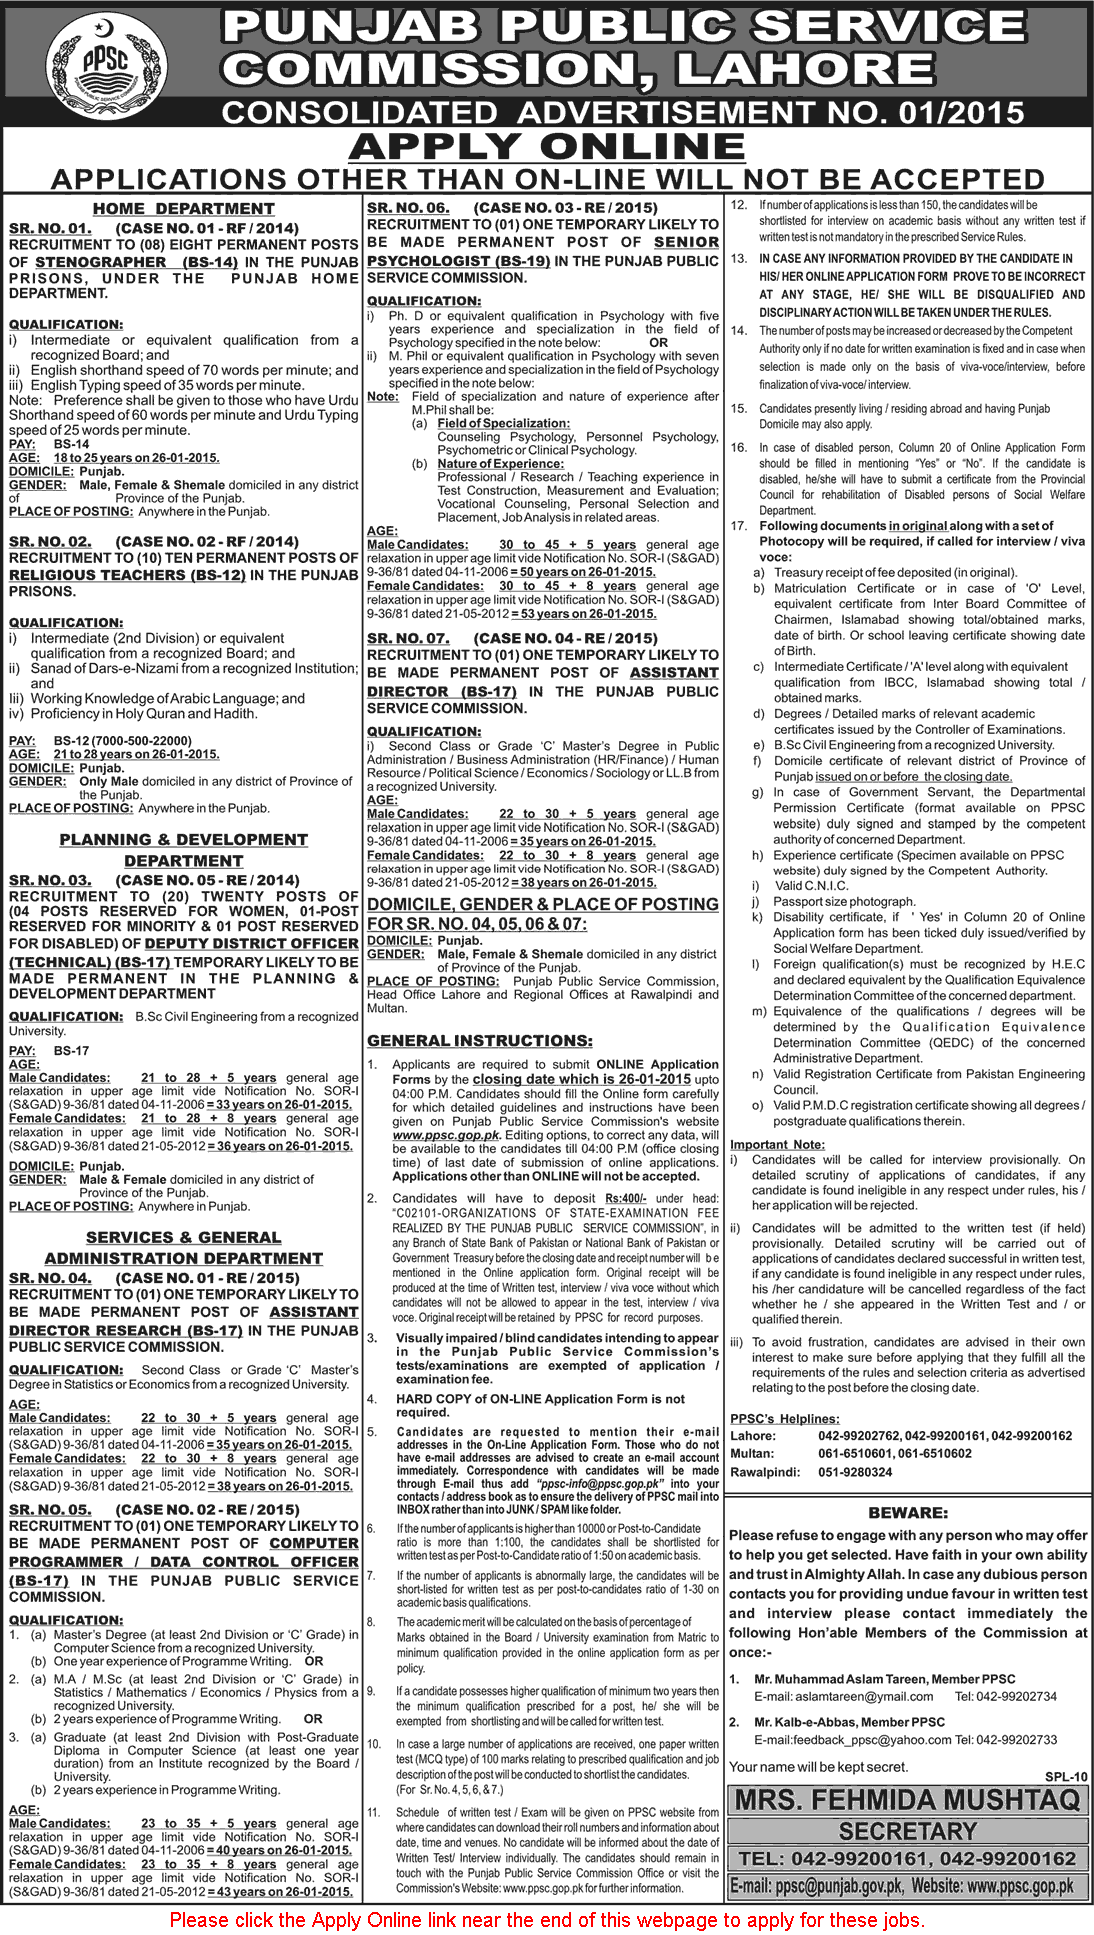 PPSC Jobs 2015 Apply Online Consolidated Advertisement 01/2015 (1)